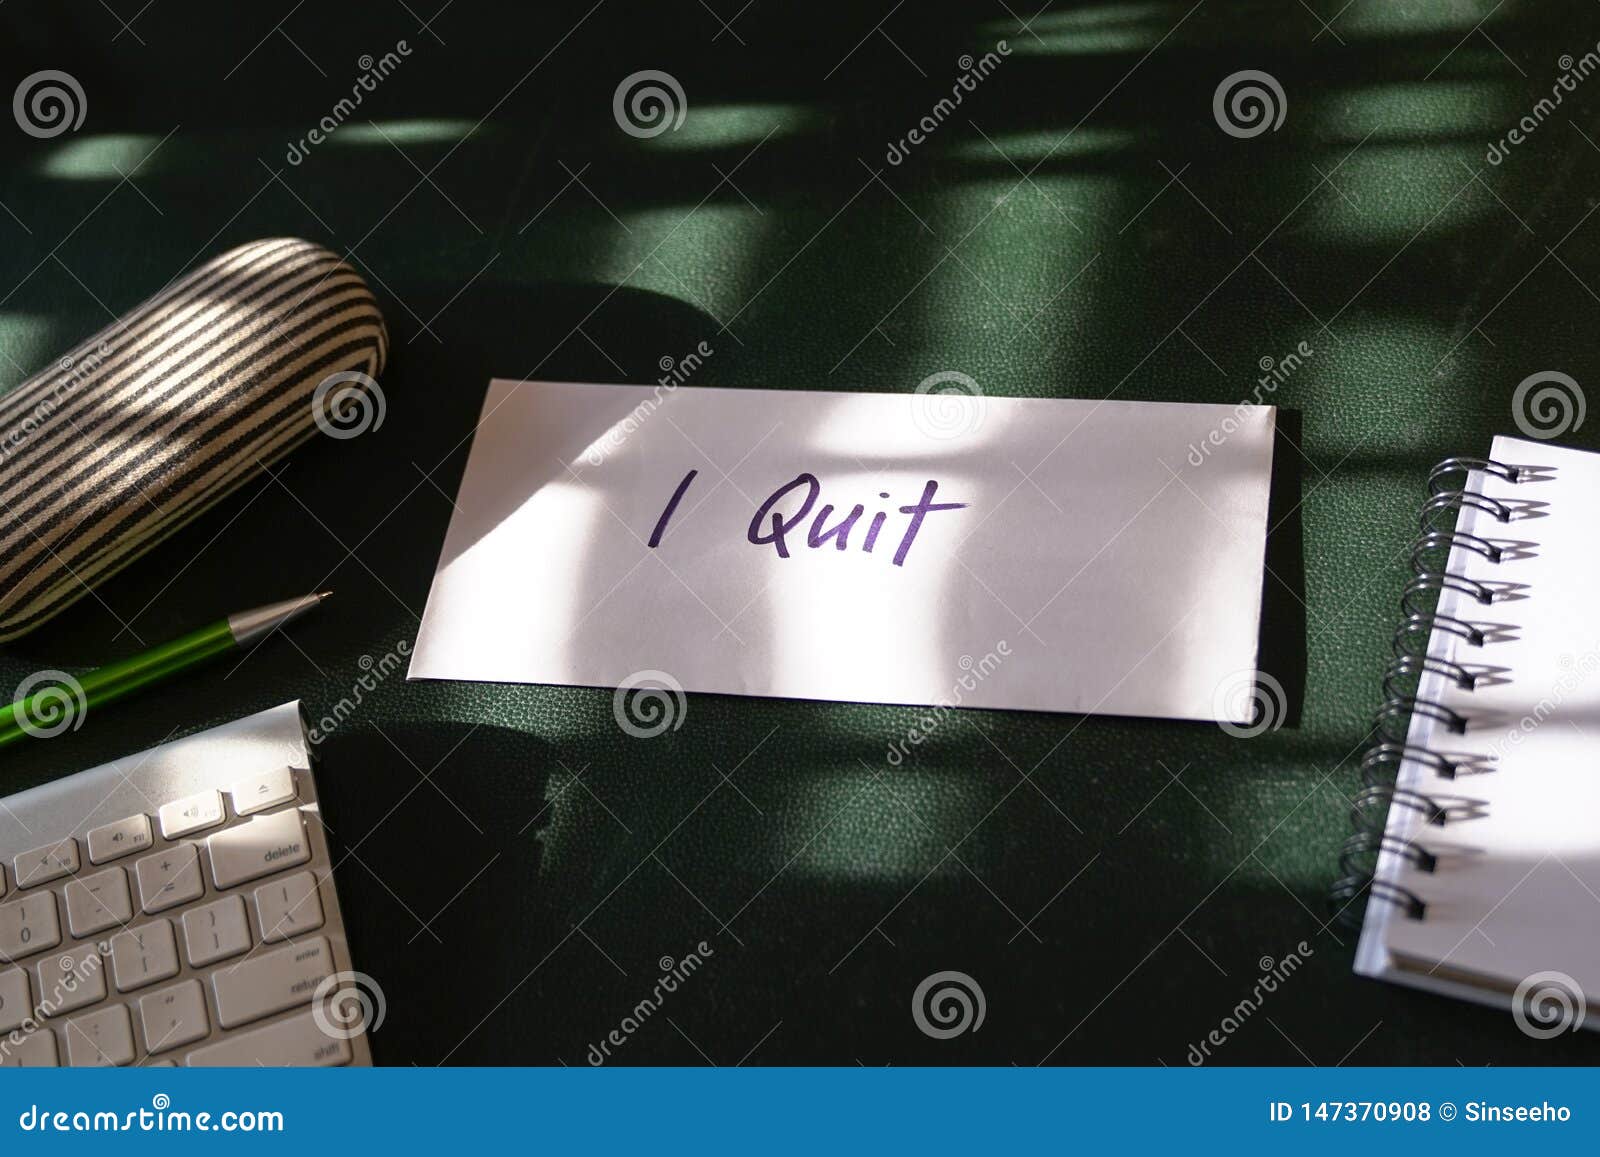 Resignation Letter With Words I Quit On The Envelope Stock Photo - Image of letter, problem ...